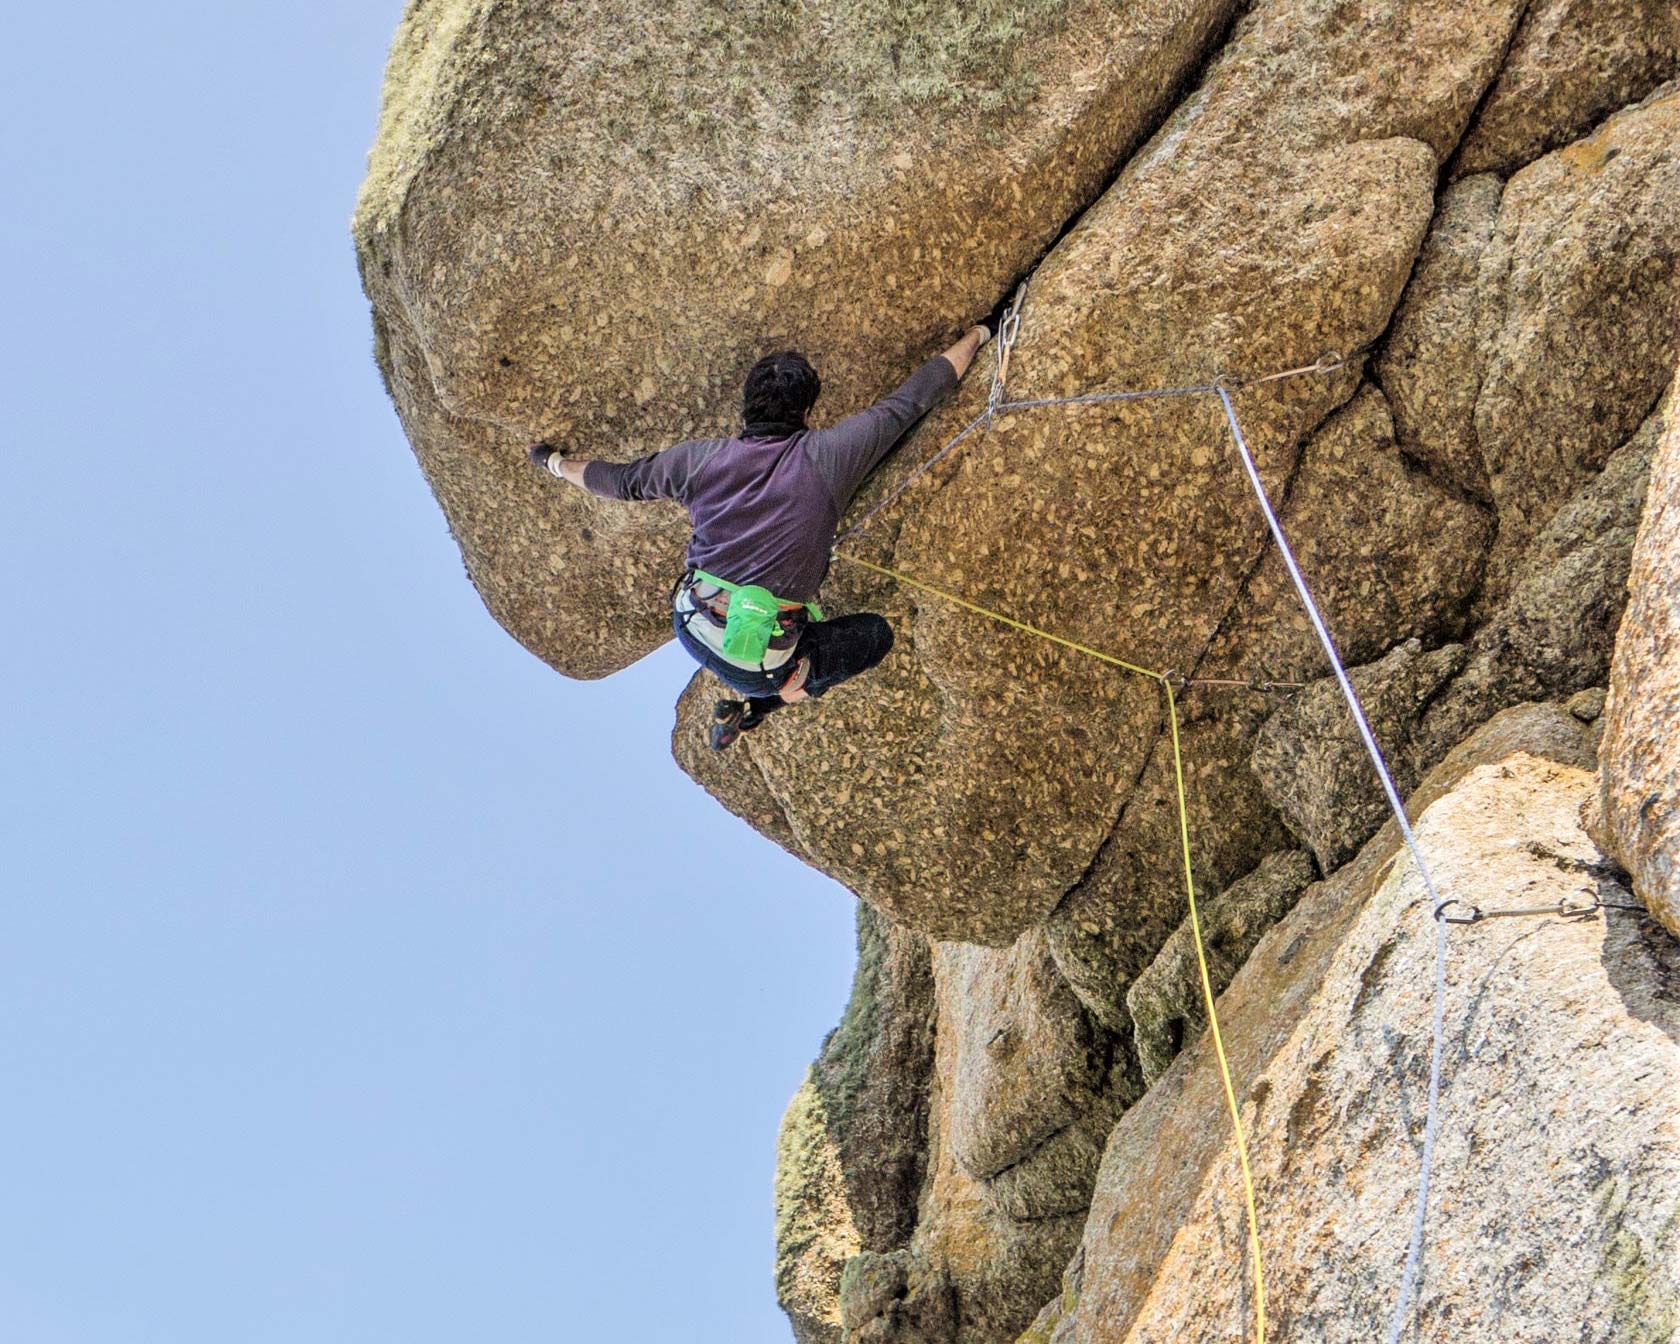 Climber on Superjam at Sennen, Cornwall. A wide roof crack test piece